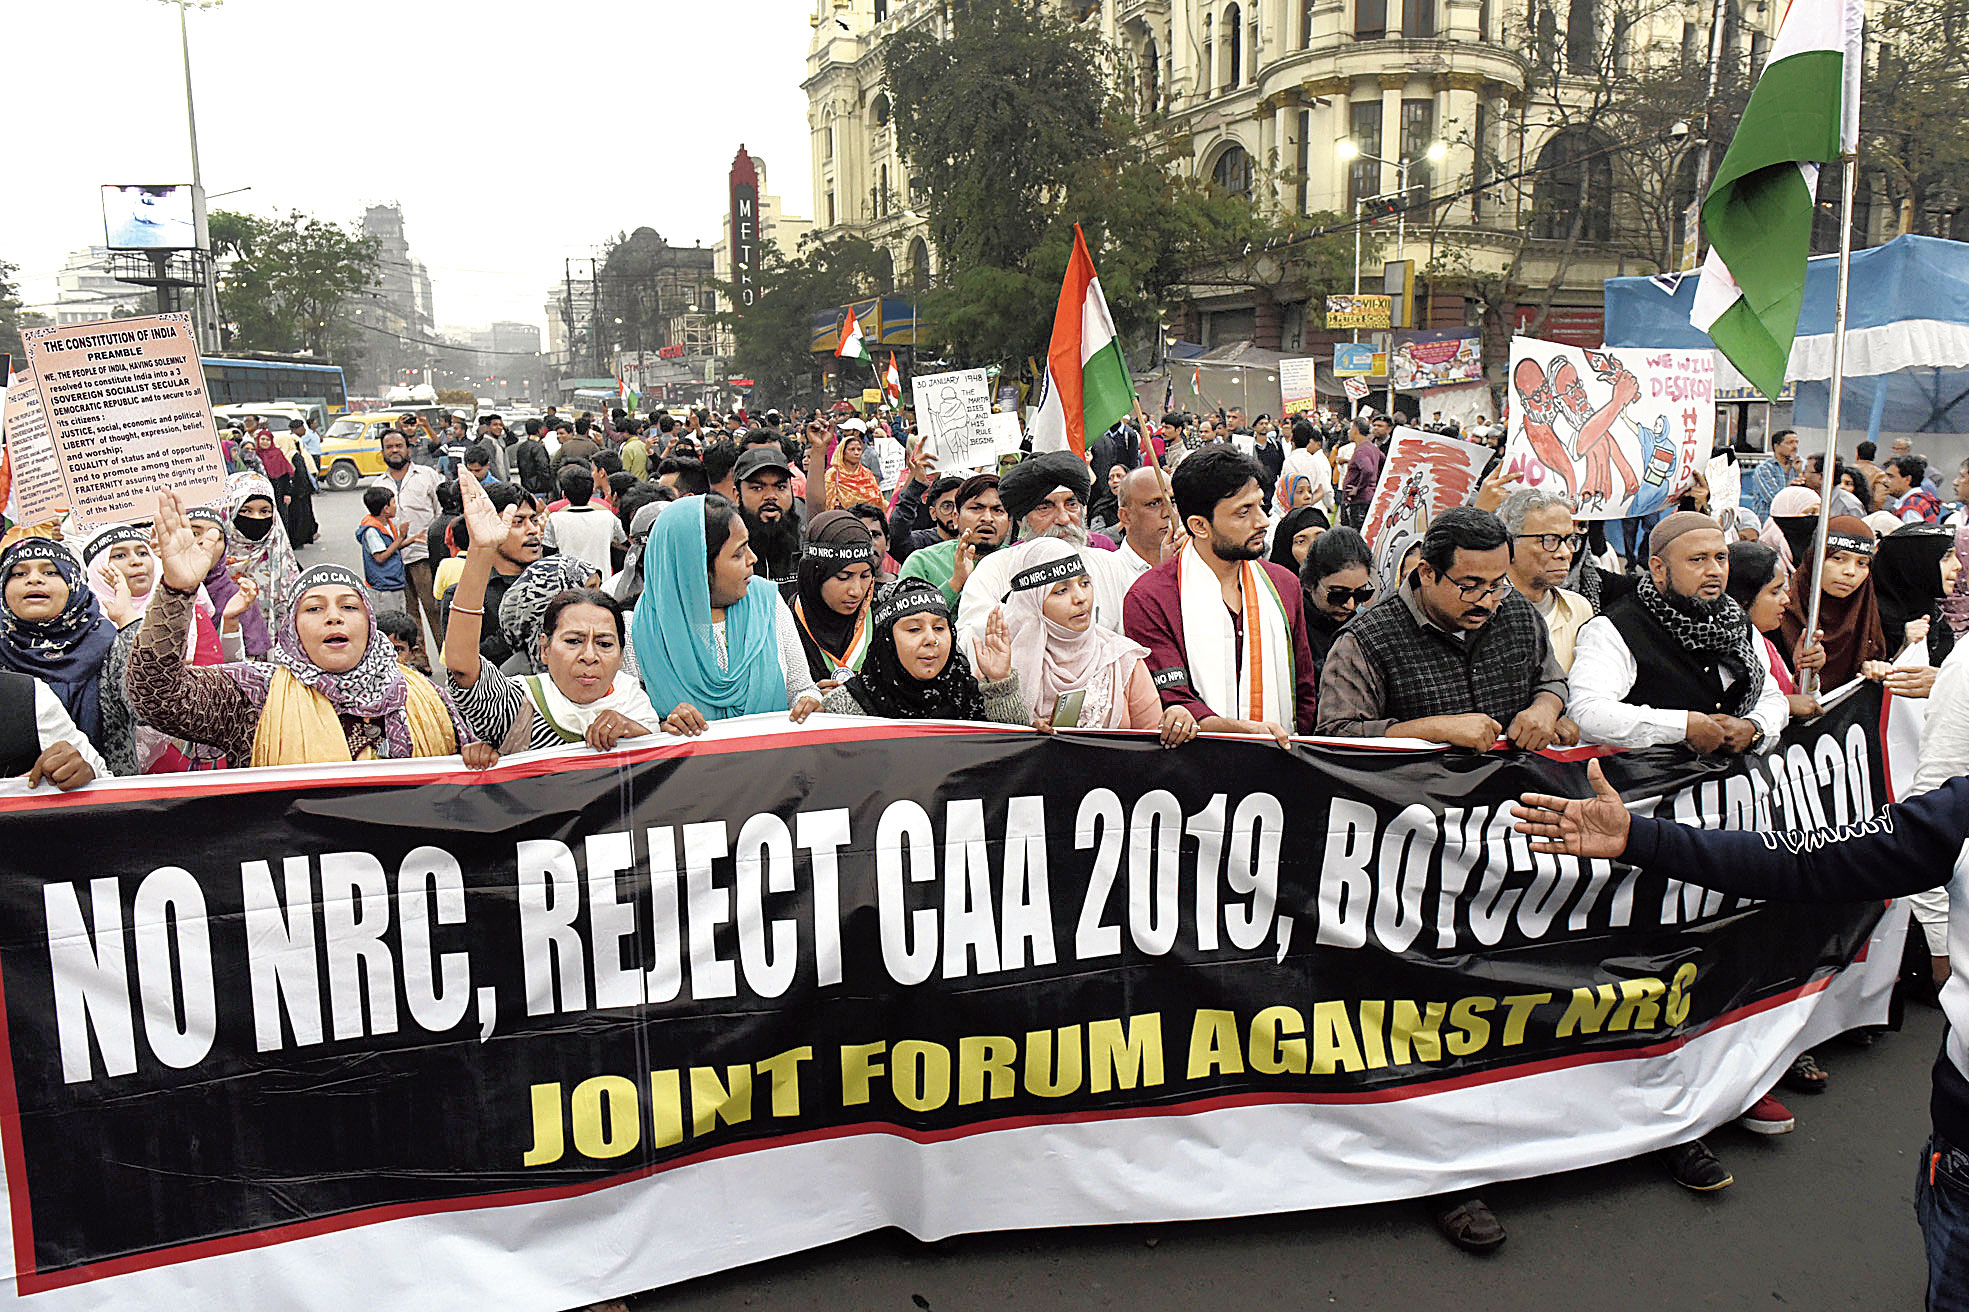 Actor Mohammed Zeeshan Ayyub (in maroon), Prasenjit Bose (to Ayyub’s left) of the Joint Forum Against NRC and others walk towards the Gandhi statue on Mayo Road from the sit-in venue near New Market on Thursday.